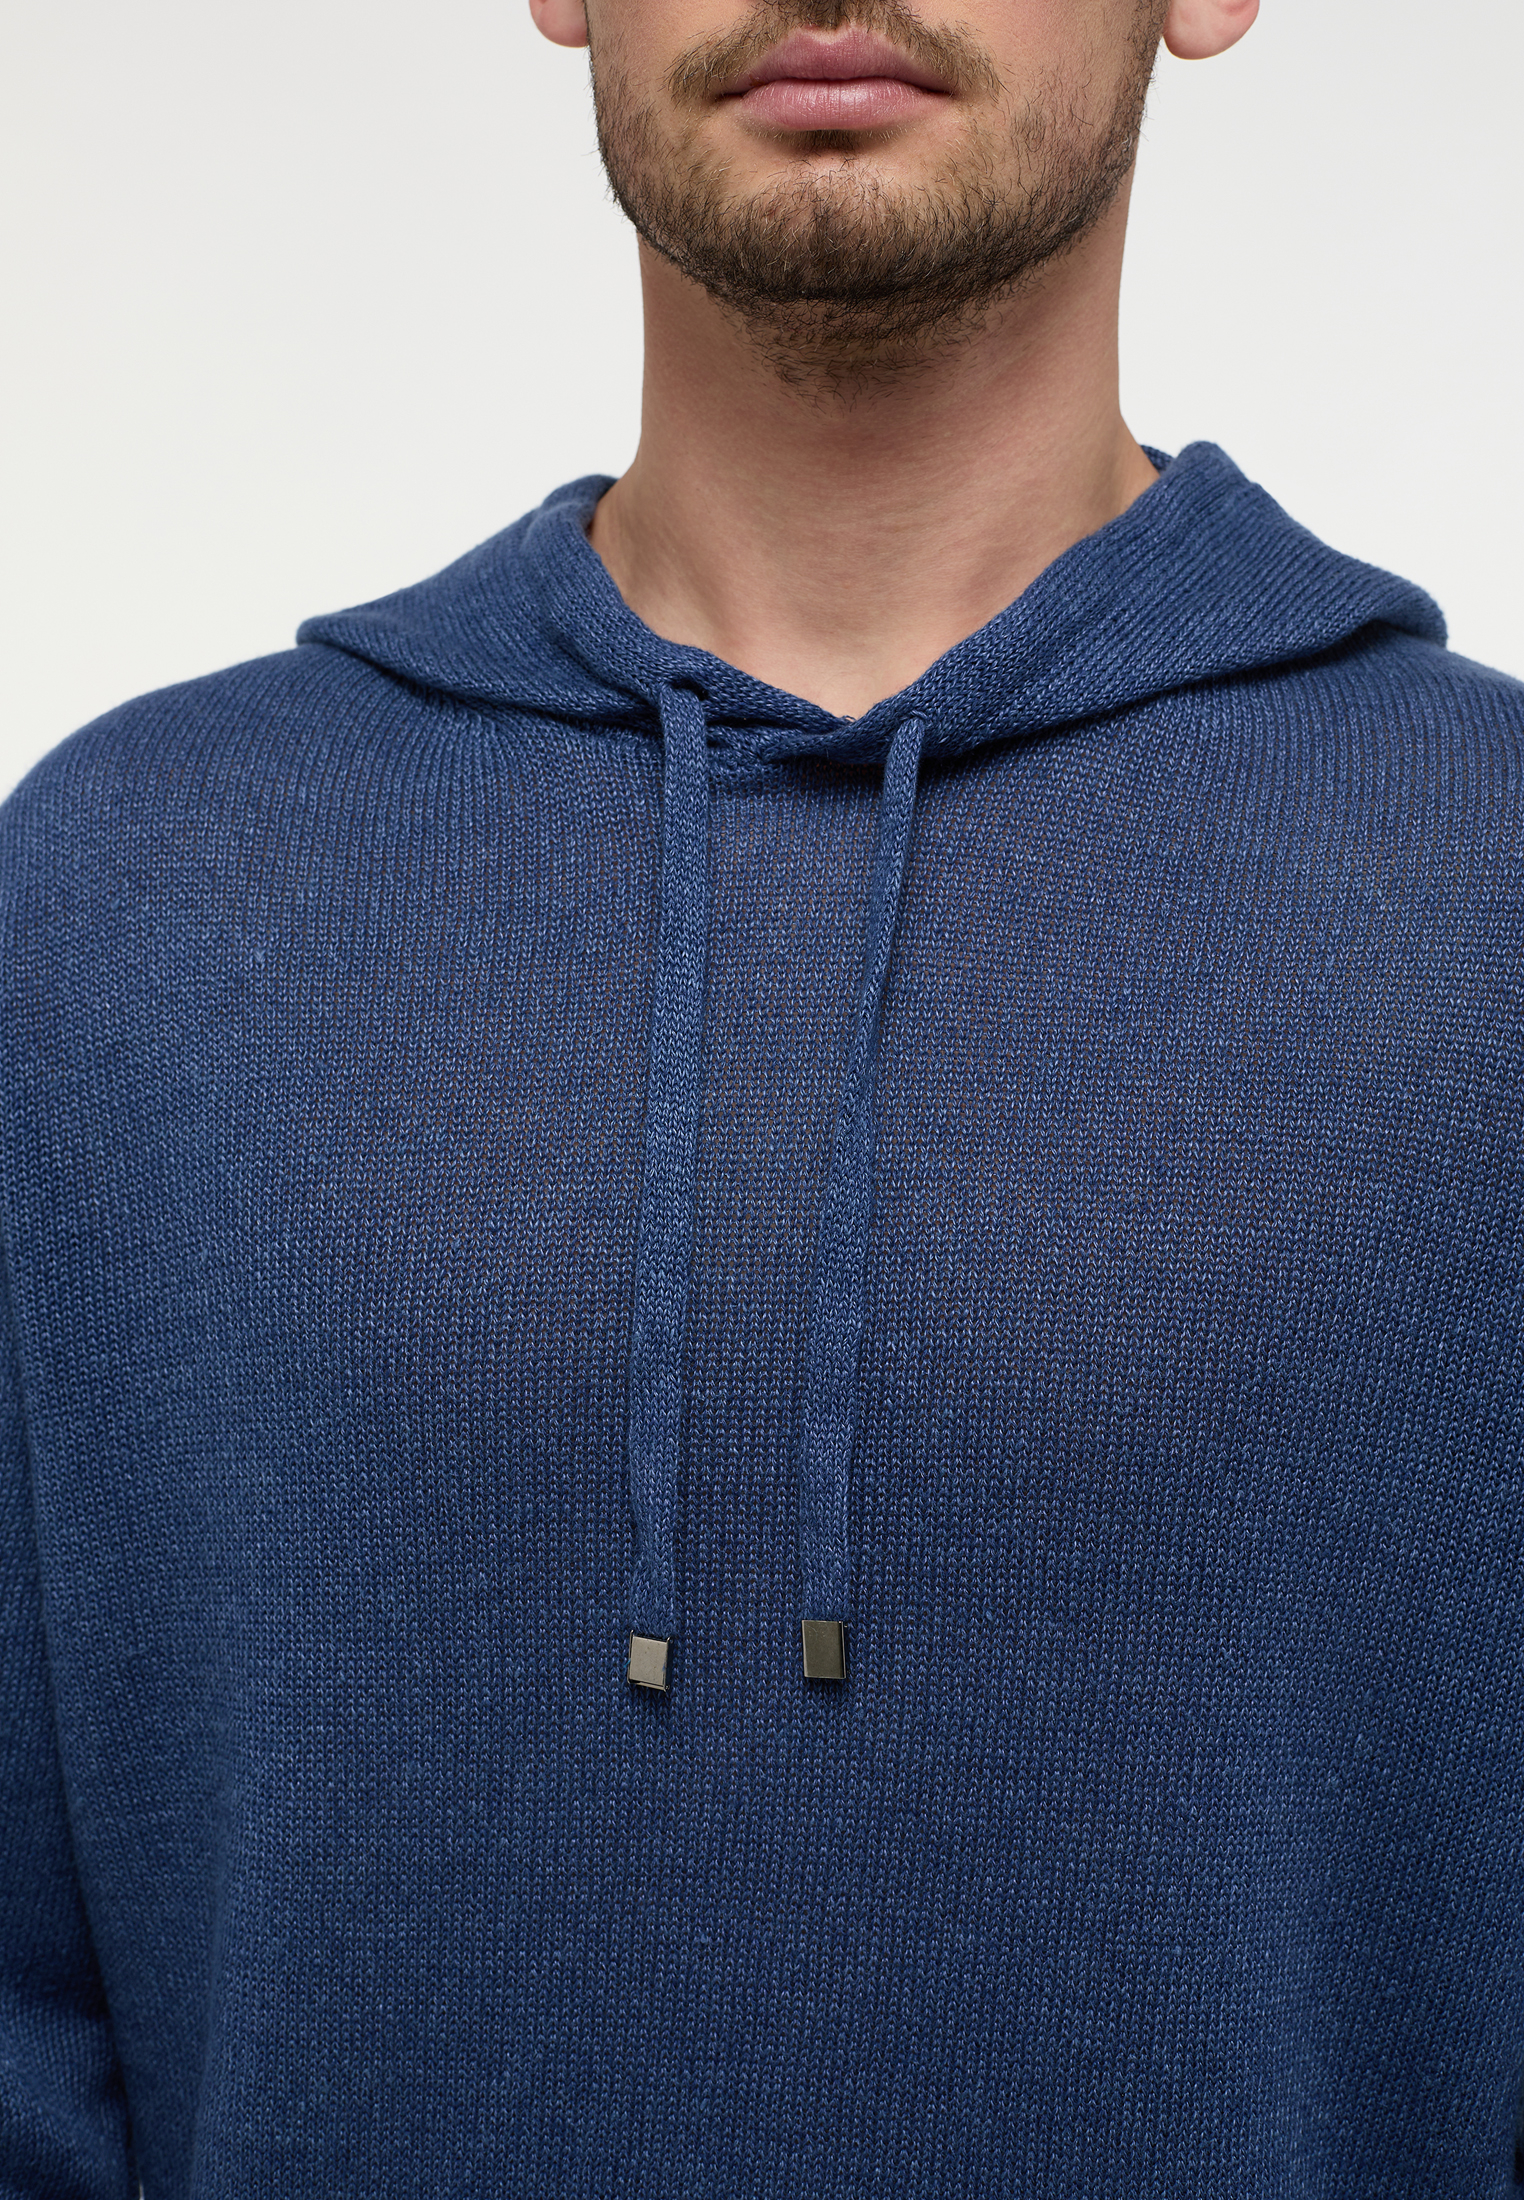 Knitted jumper in blue plain